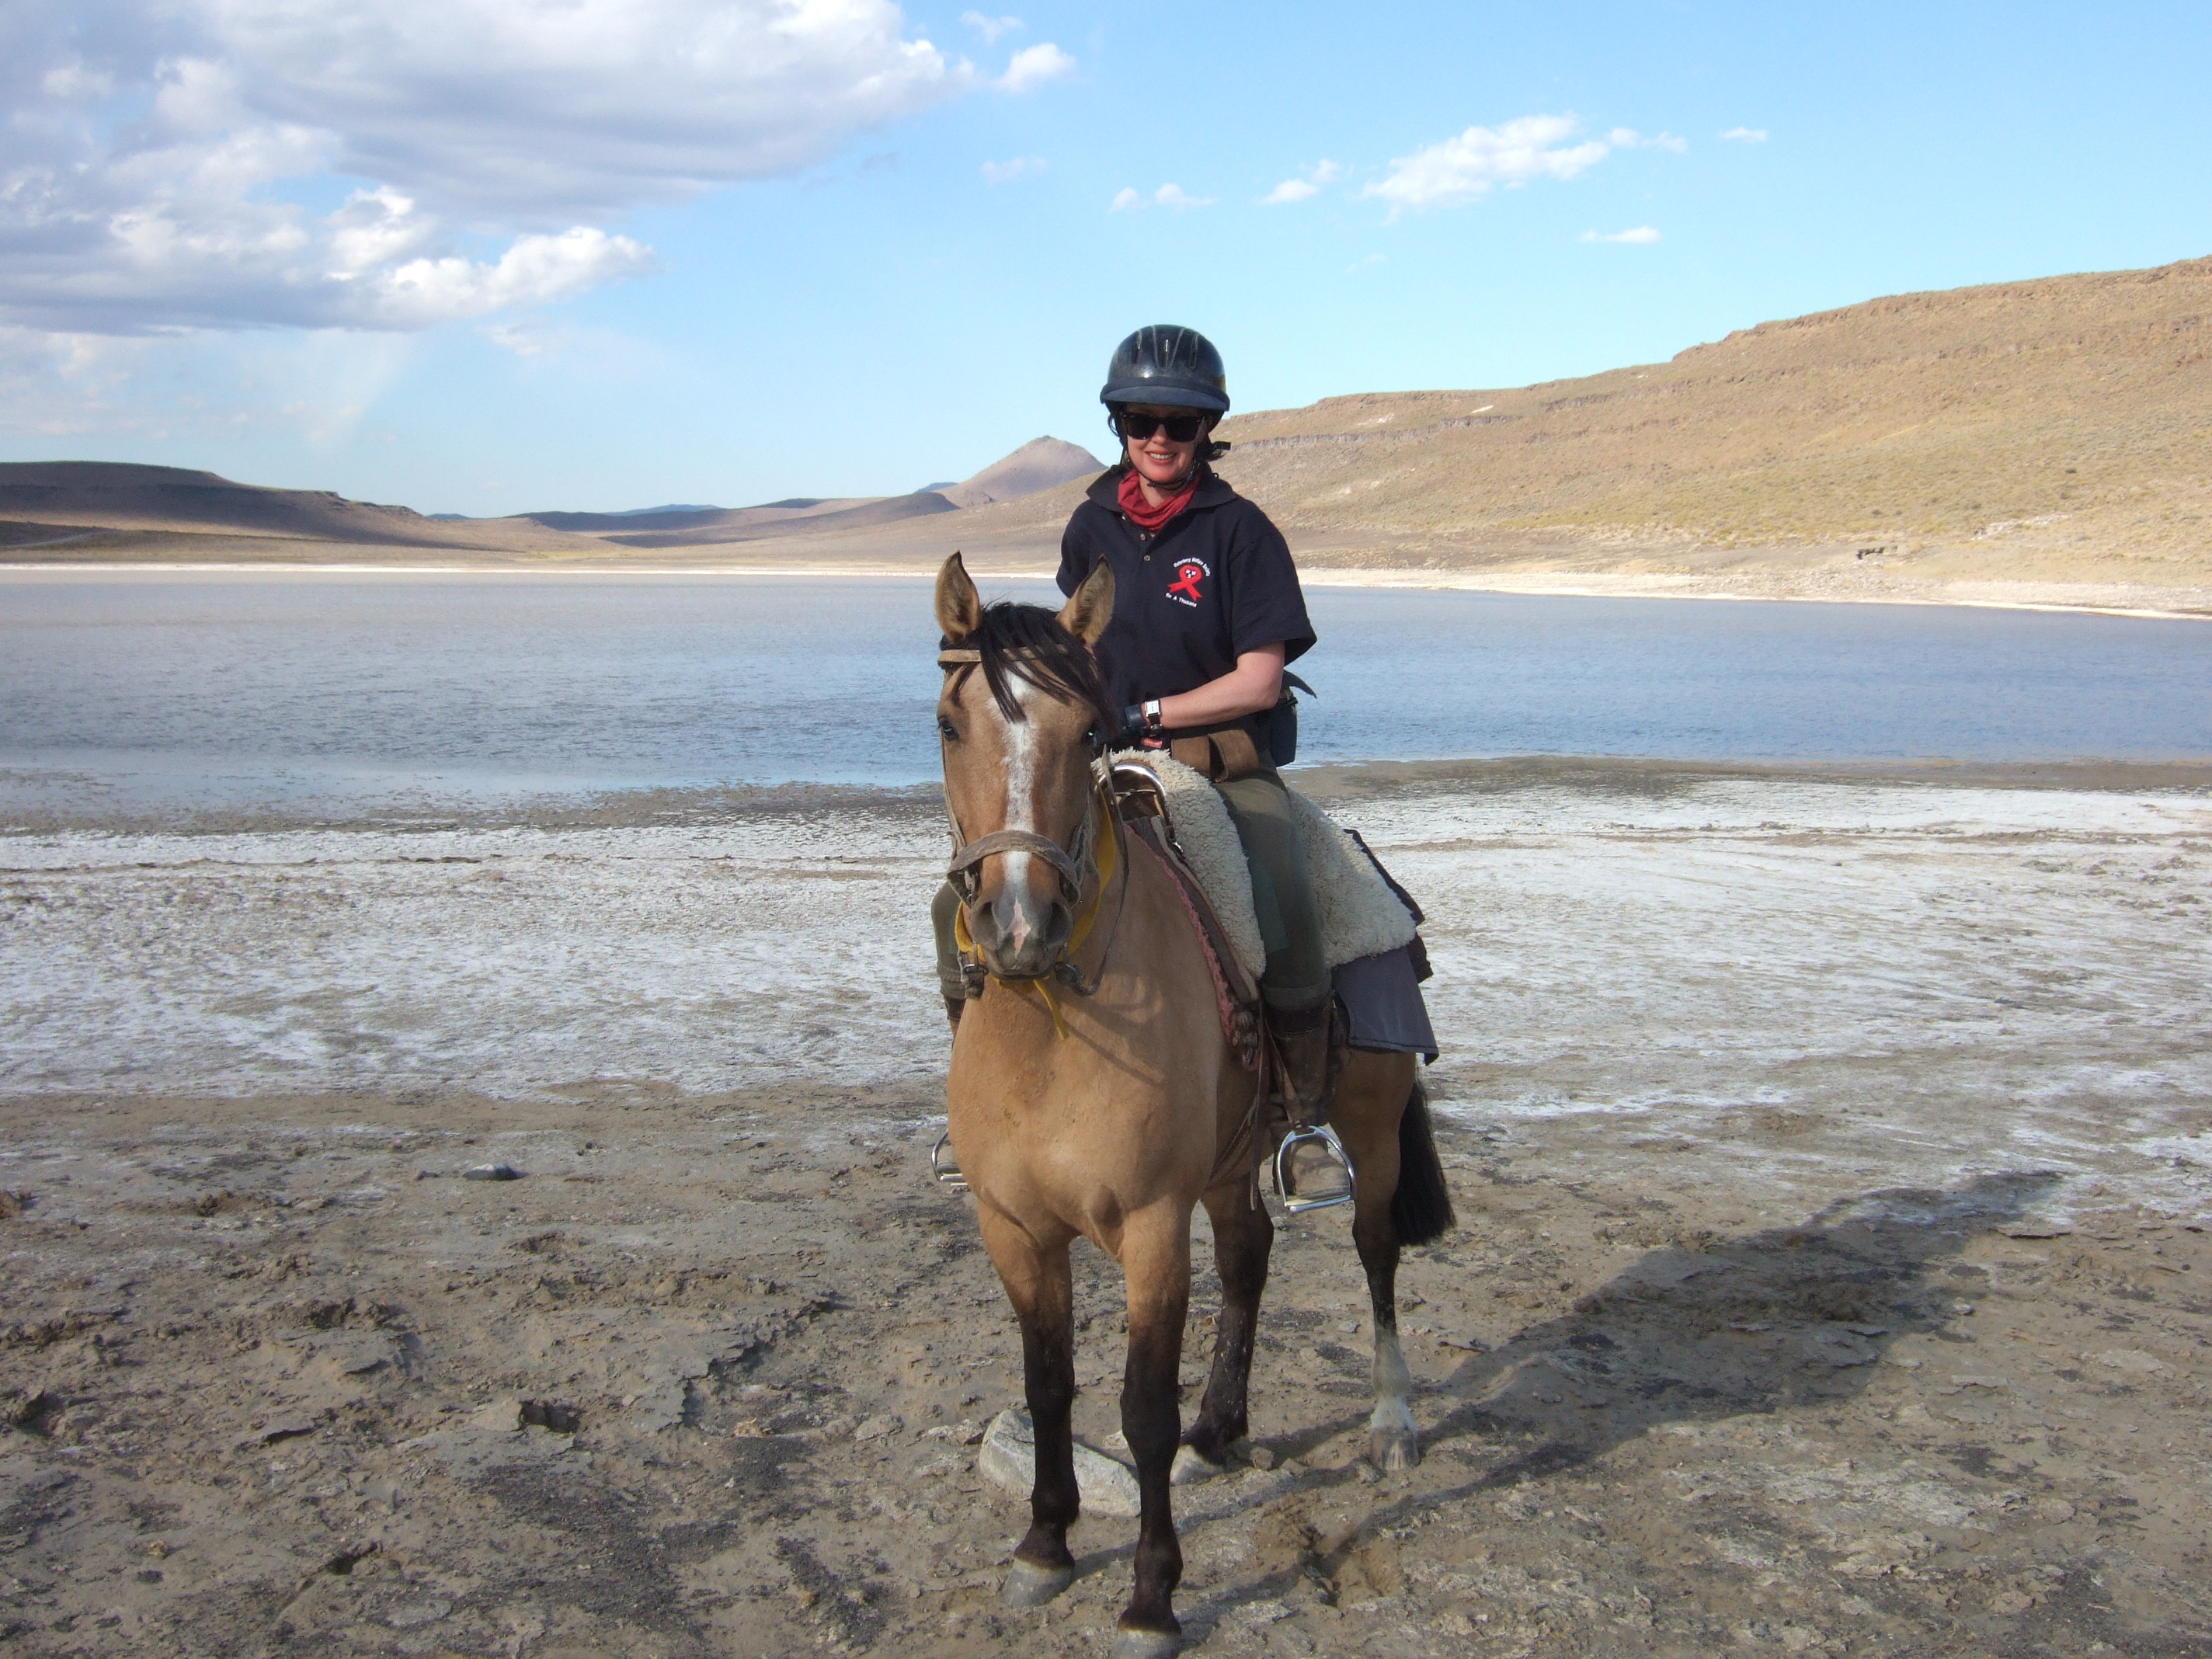 Sophie Neville at a salt lake in Argentia whilst riding across South America to raise funds to combat HIV/AIDS